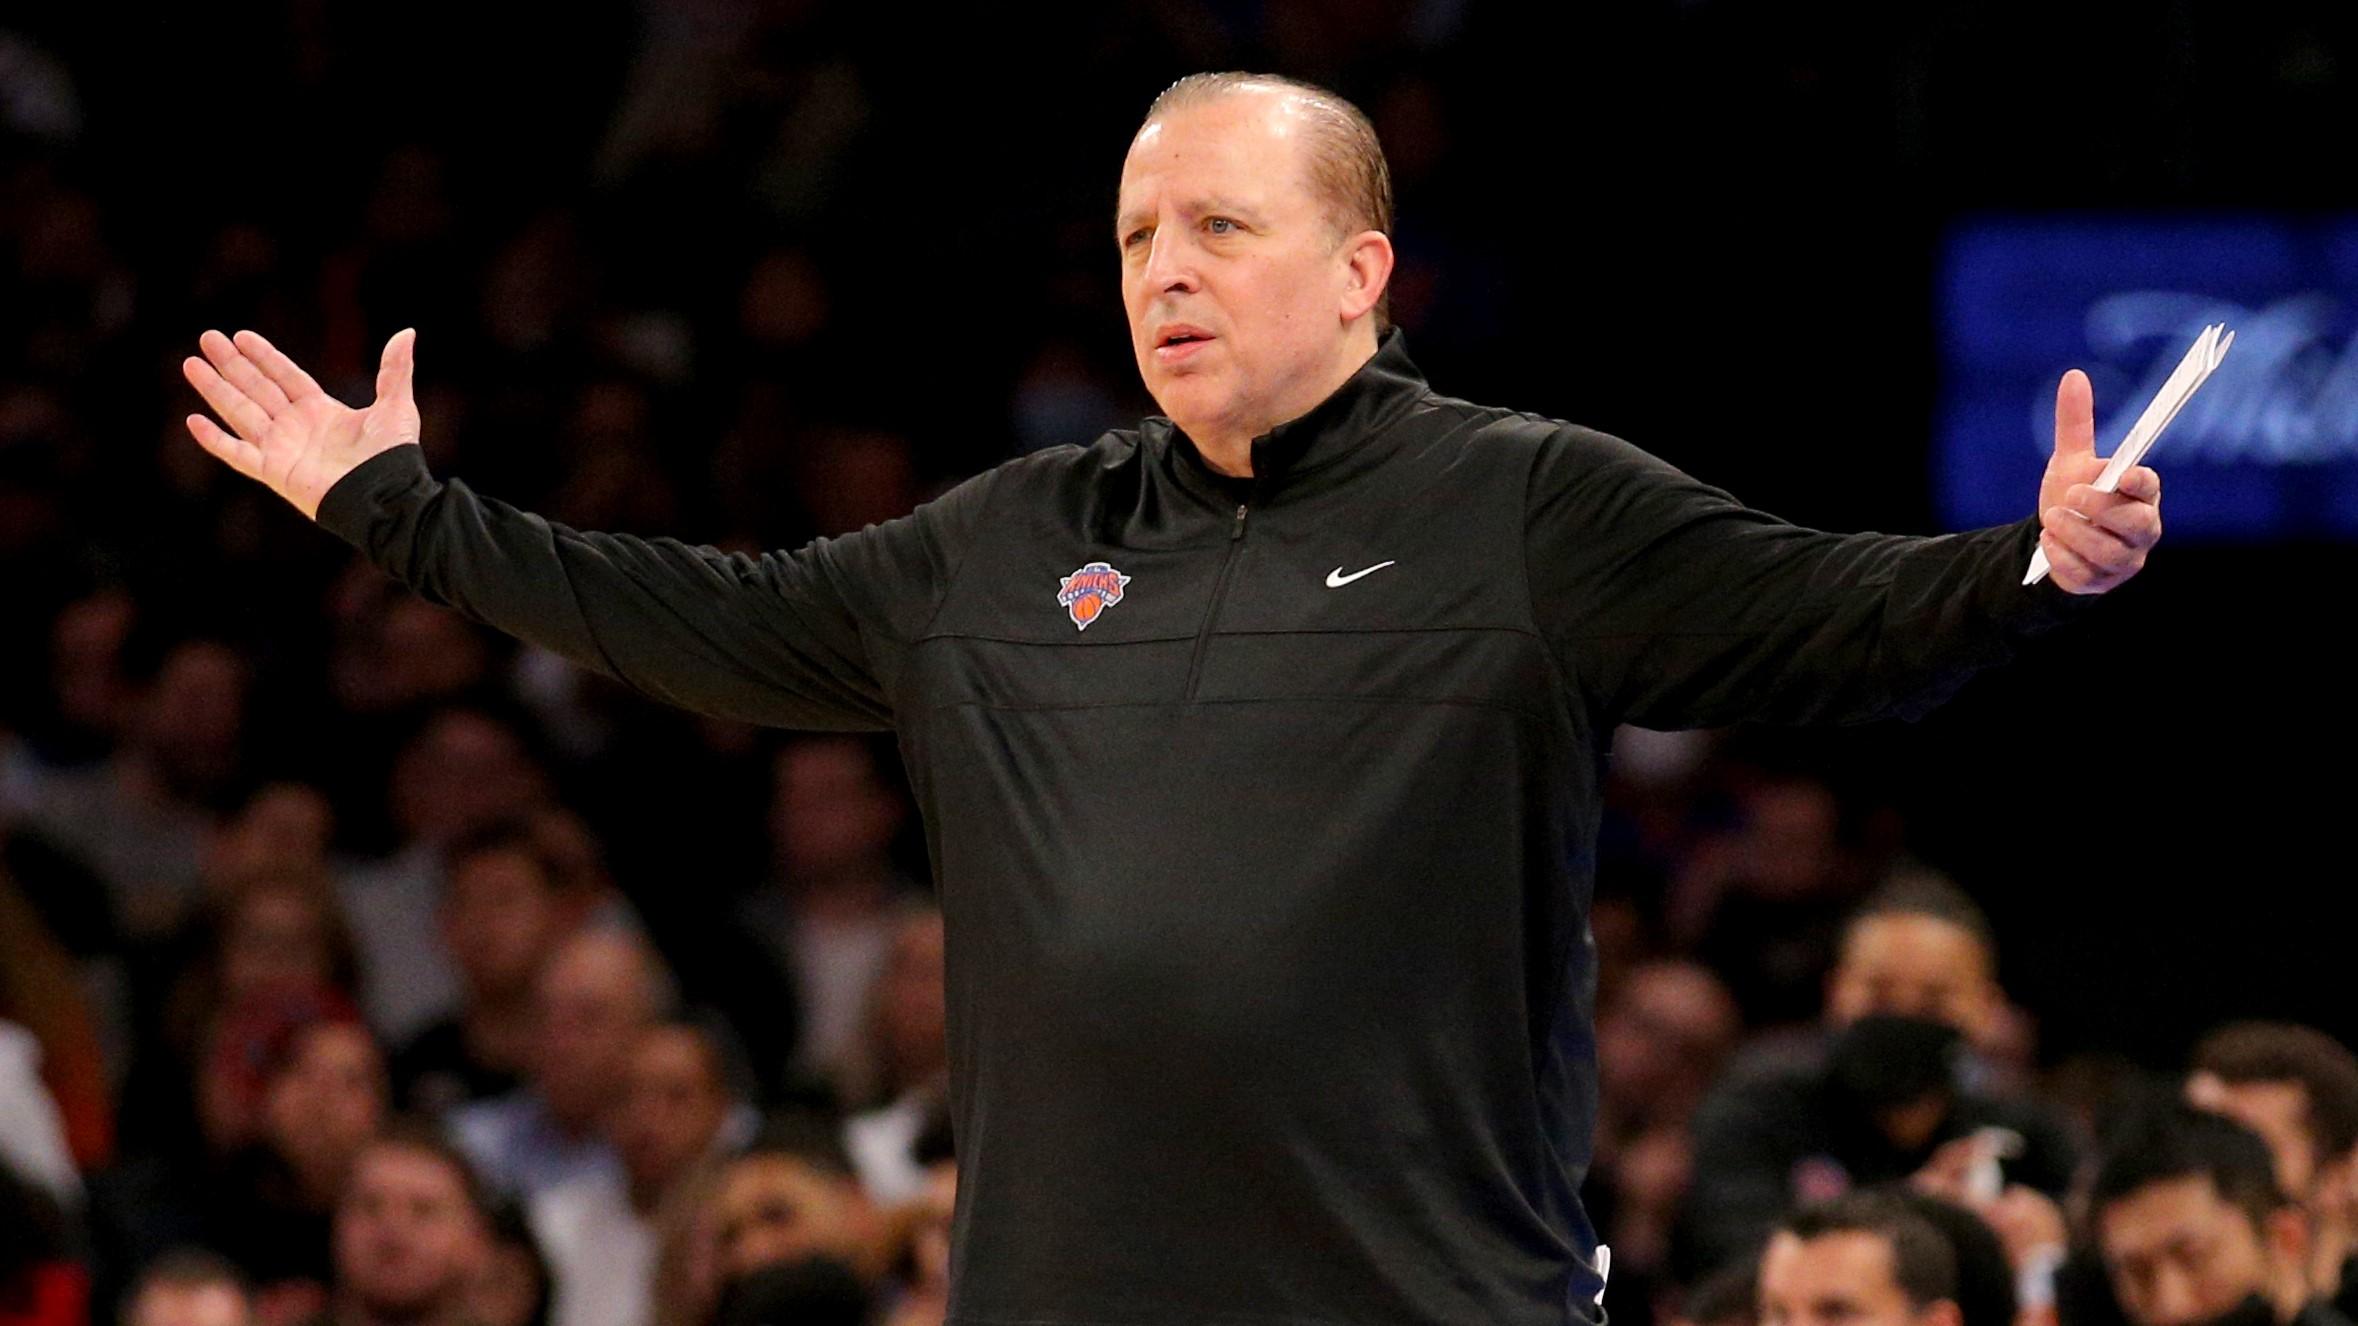 Nov 1, 2021; New York, New York, USA; New York Knicks head coach Tom Thibodeau reacts as he coaches against the Toronto Raptors during the first quarter at Madison Square Garden. / Brad Penner-USA TODAY Sports